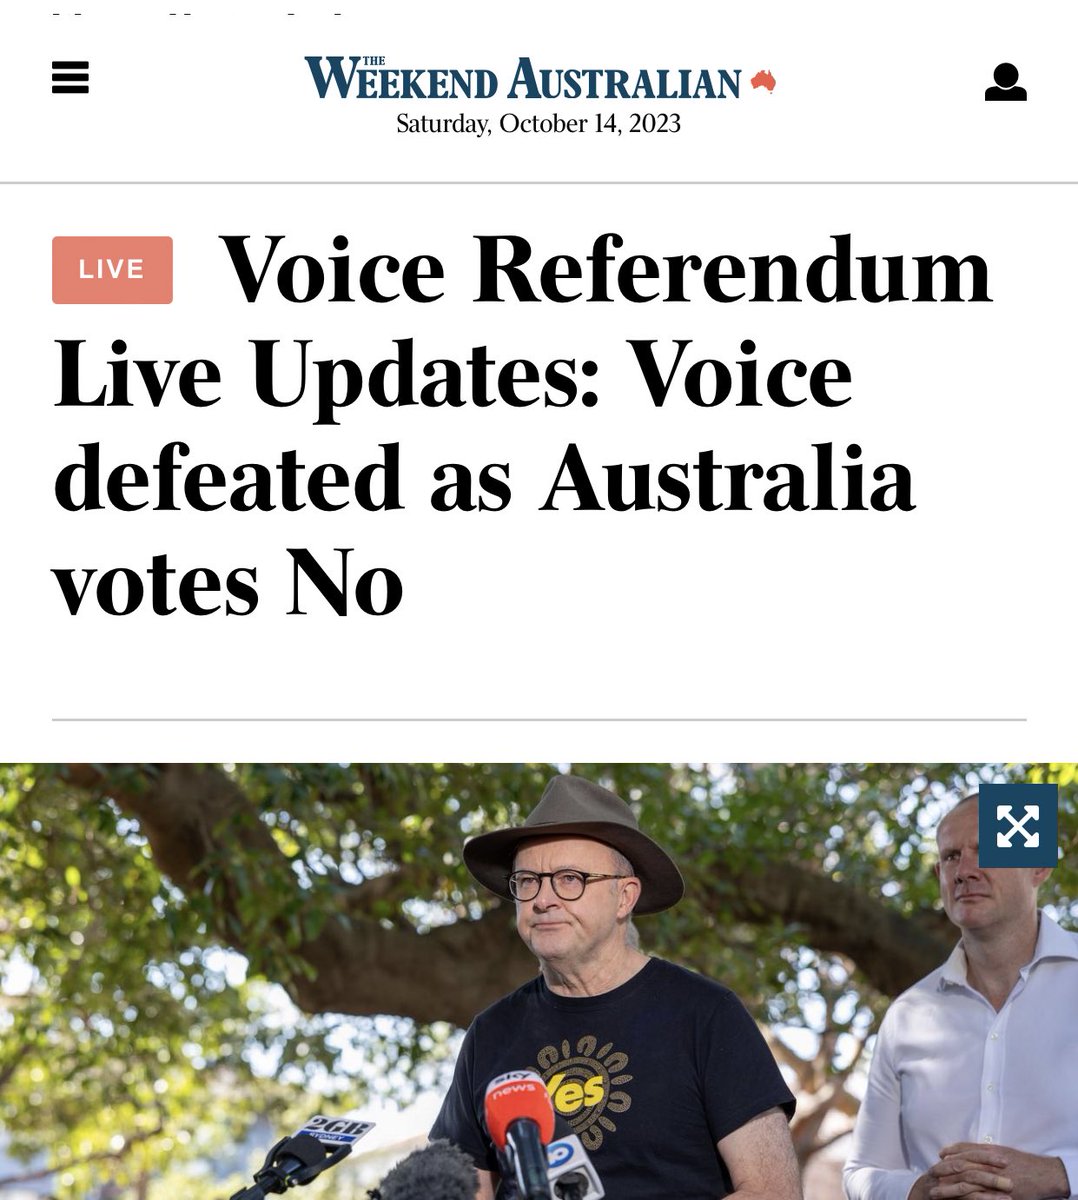 Australia votes NO to the Voice. 

Calls for increased censorship of ‘misinformation’ in 5,4,3,2….

#VoiceToParliament #VoiceReferendum